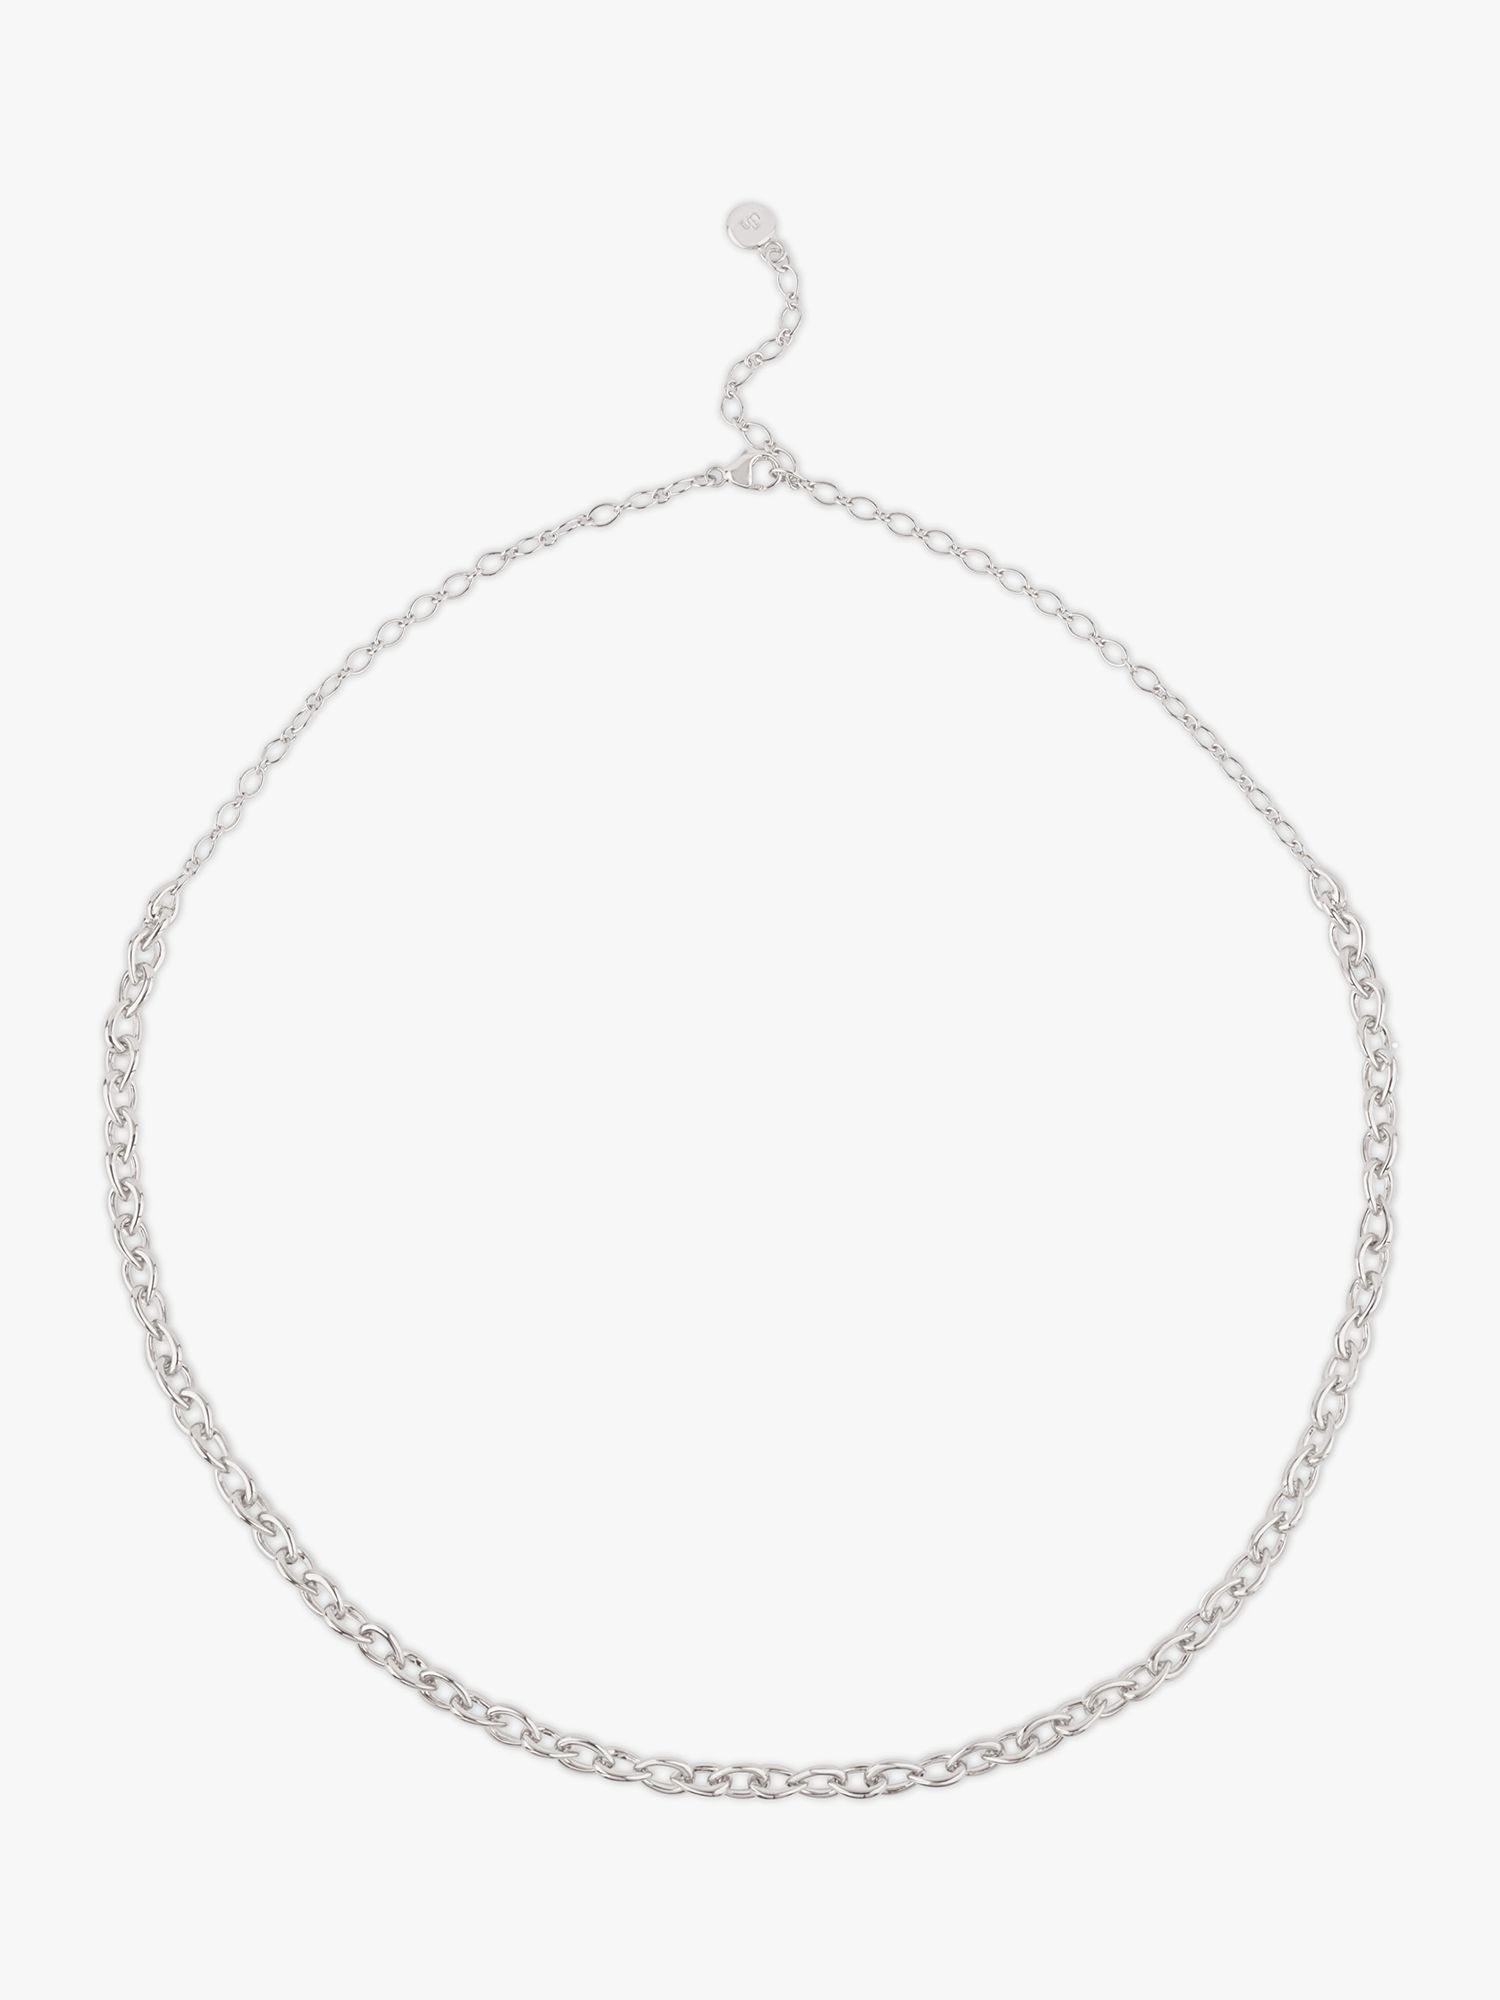 Dinny Hall Raindrop Link Chain Necklace, Silver at John Lewis & Partners